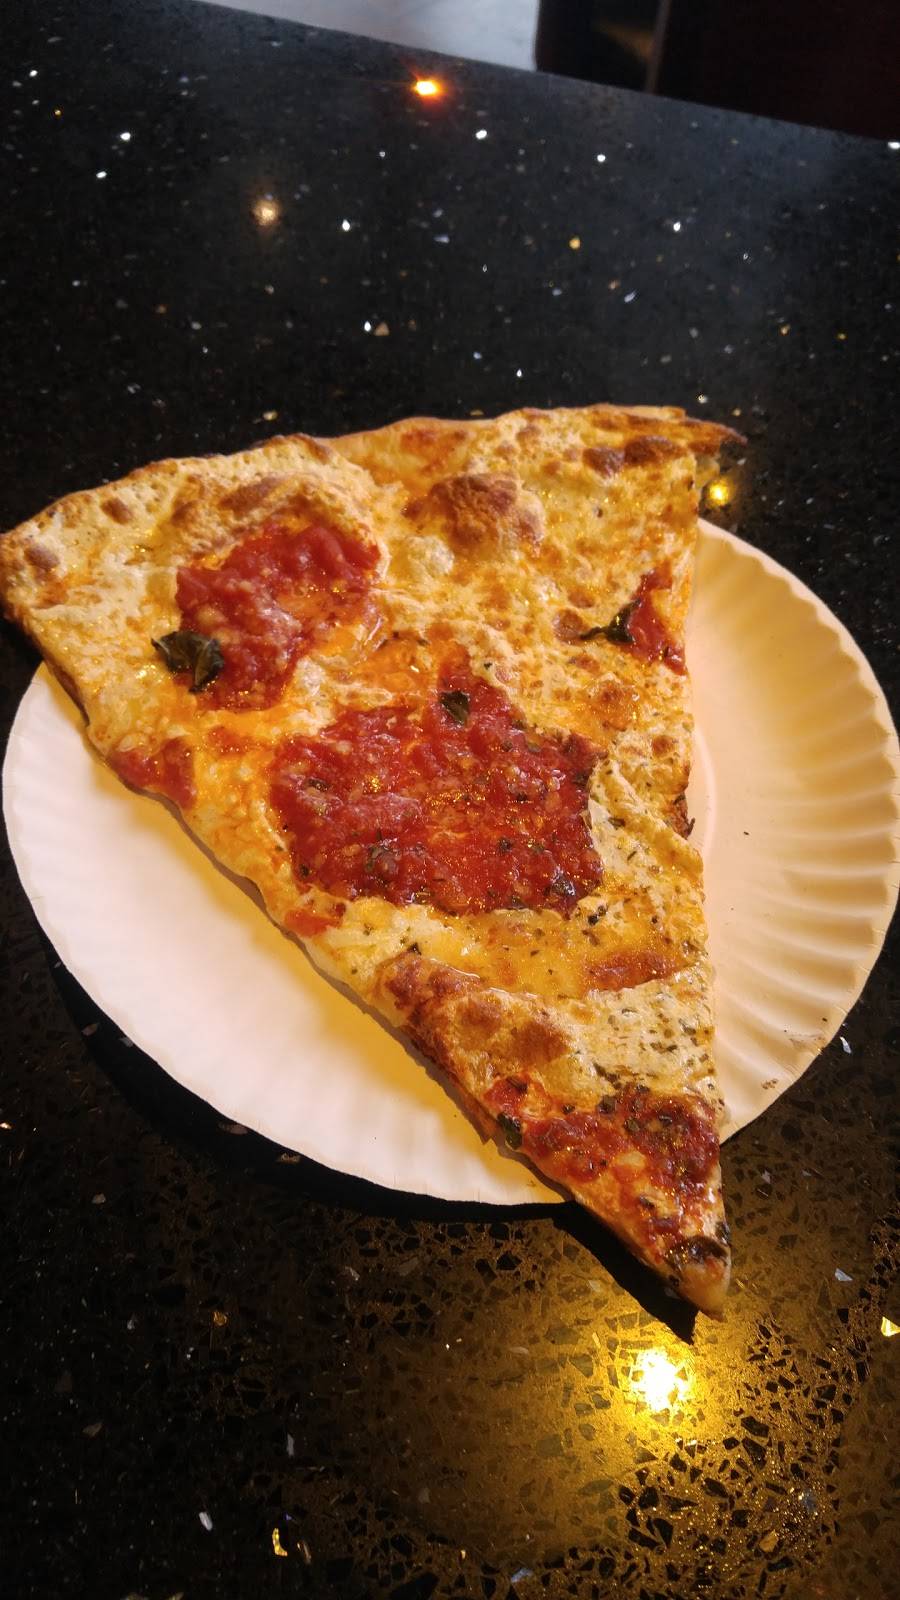 Vinnies Pizza III | meal delivery | 431 Danforth Ave, Jersey City, NJ 07305, USA | 2014335599 OR +1 201-433-5599